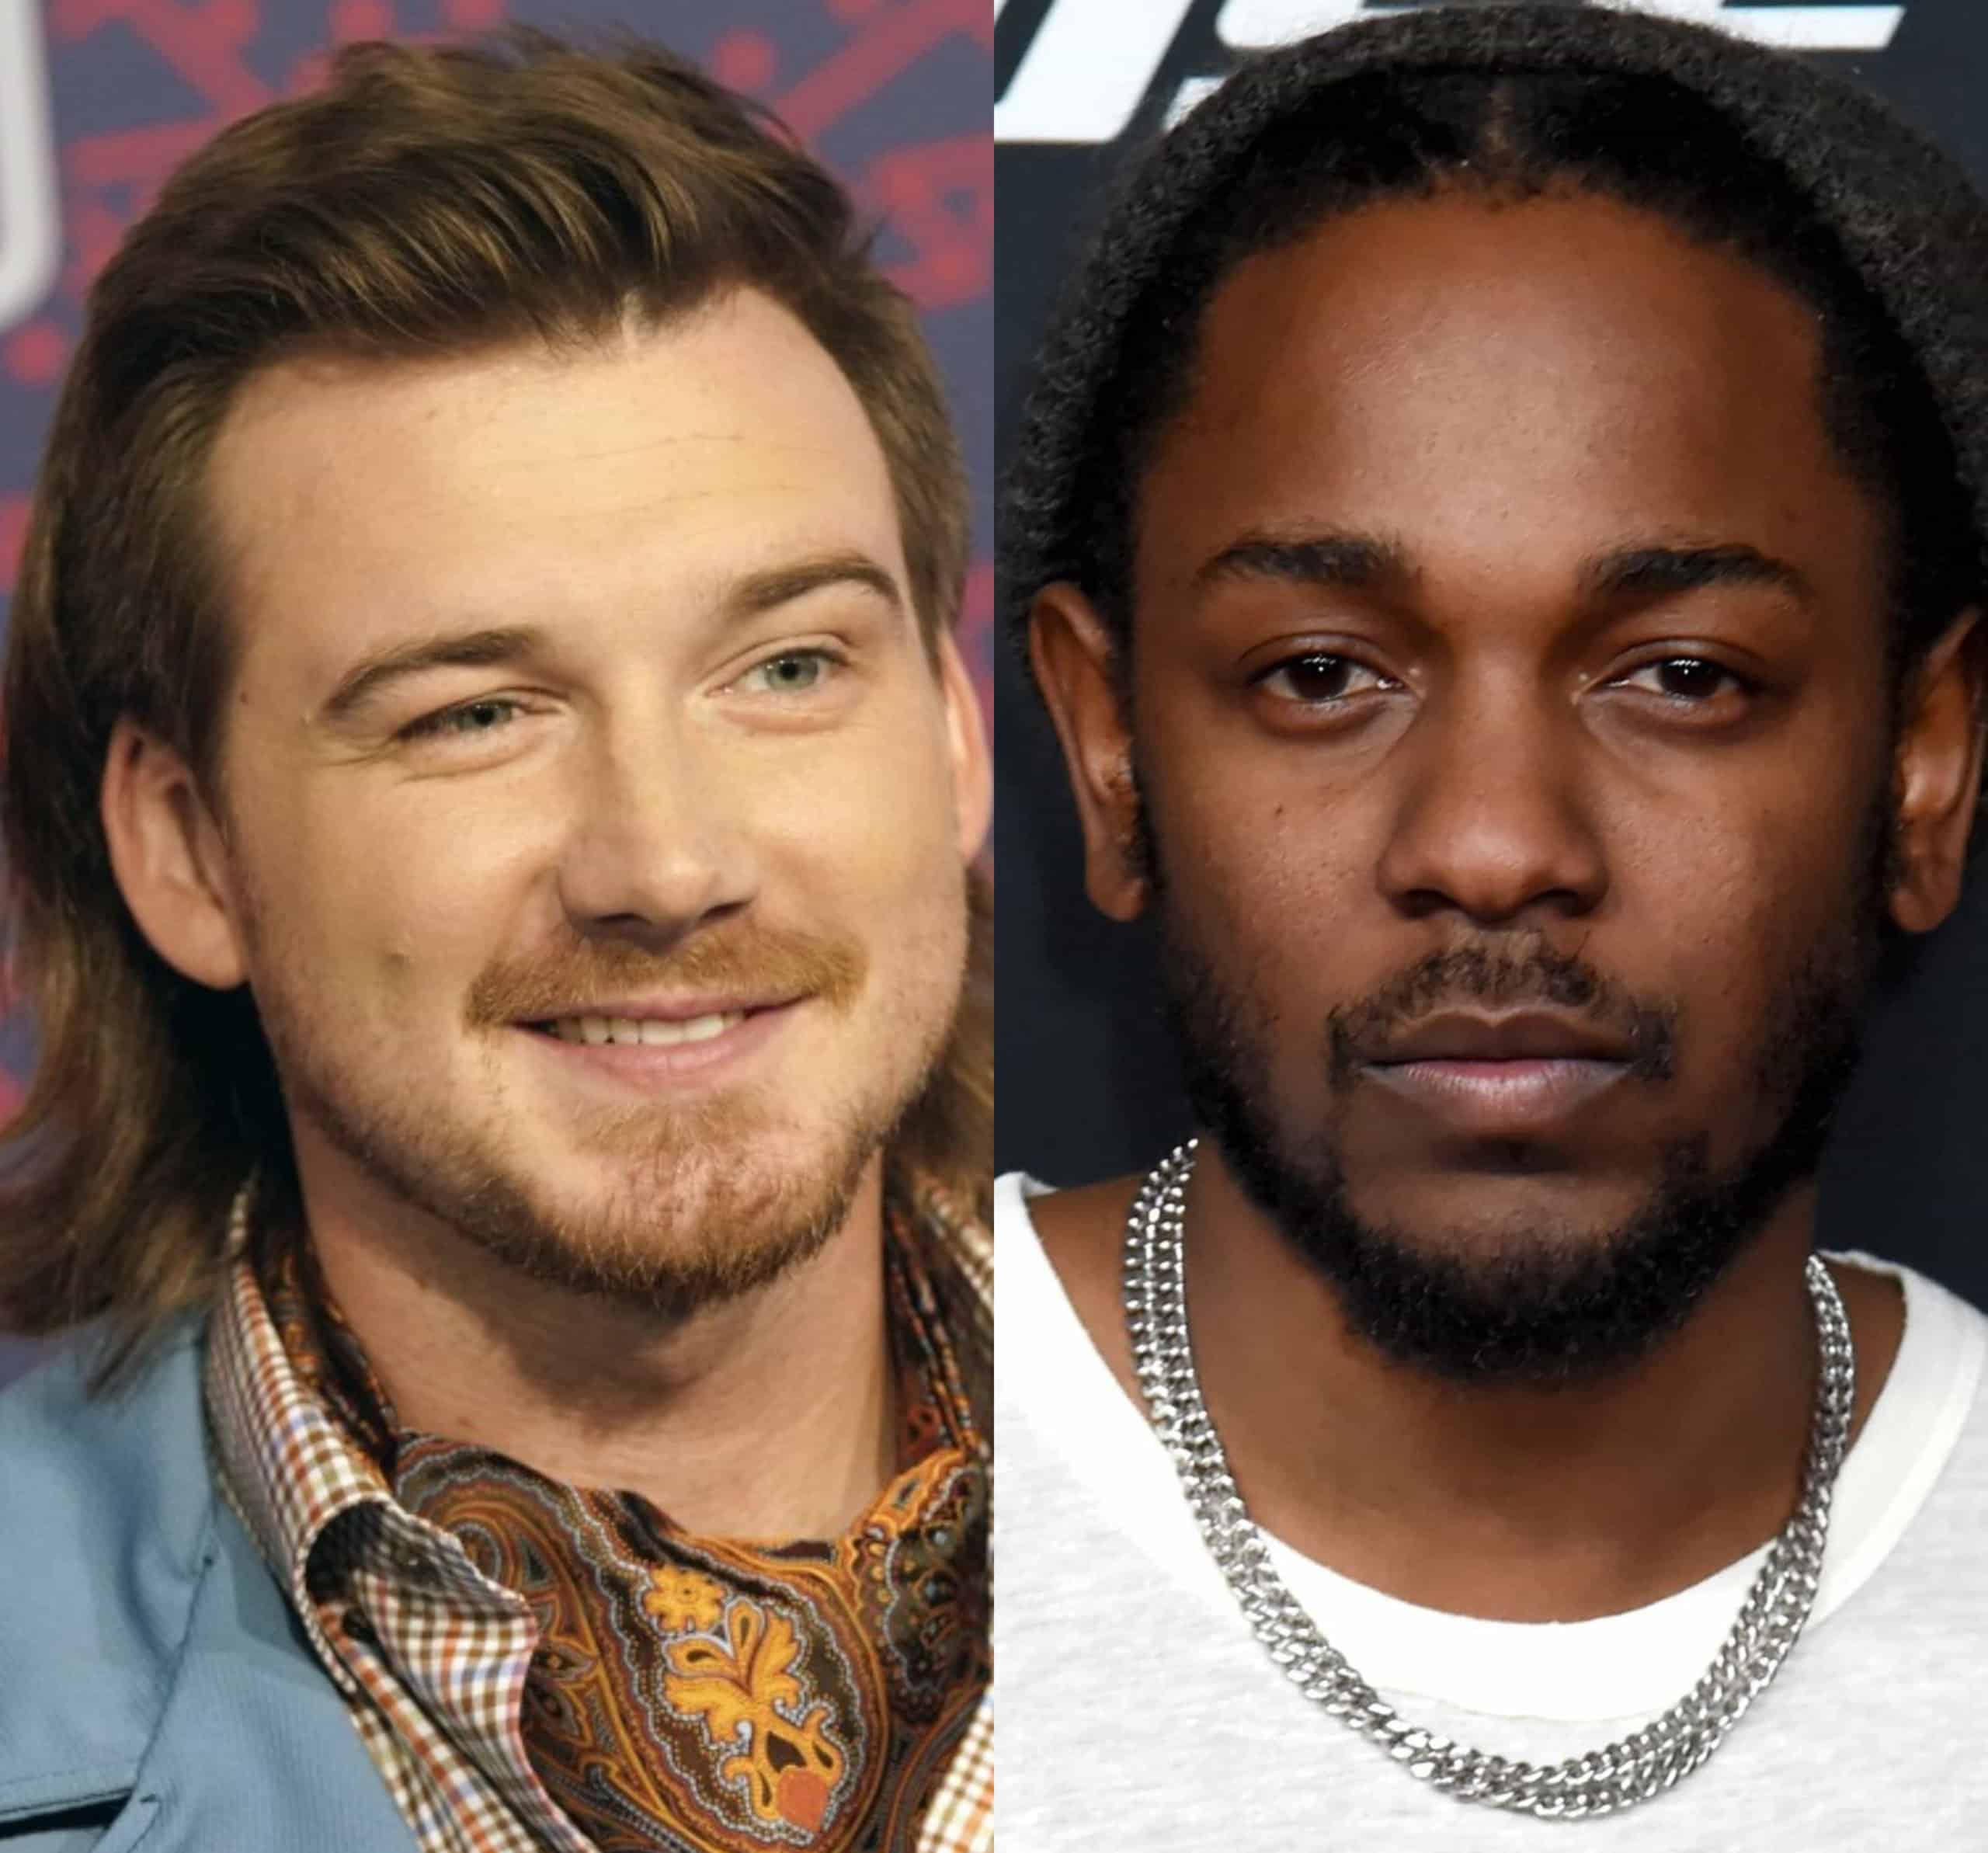 Morgan Wallen Wants To Work With Kendrick Lamar Would Be Pretty Cool